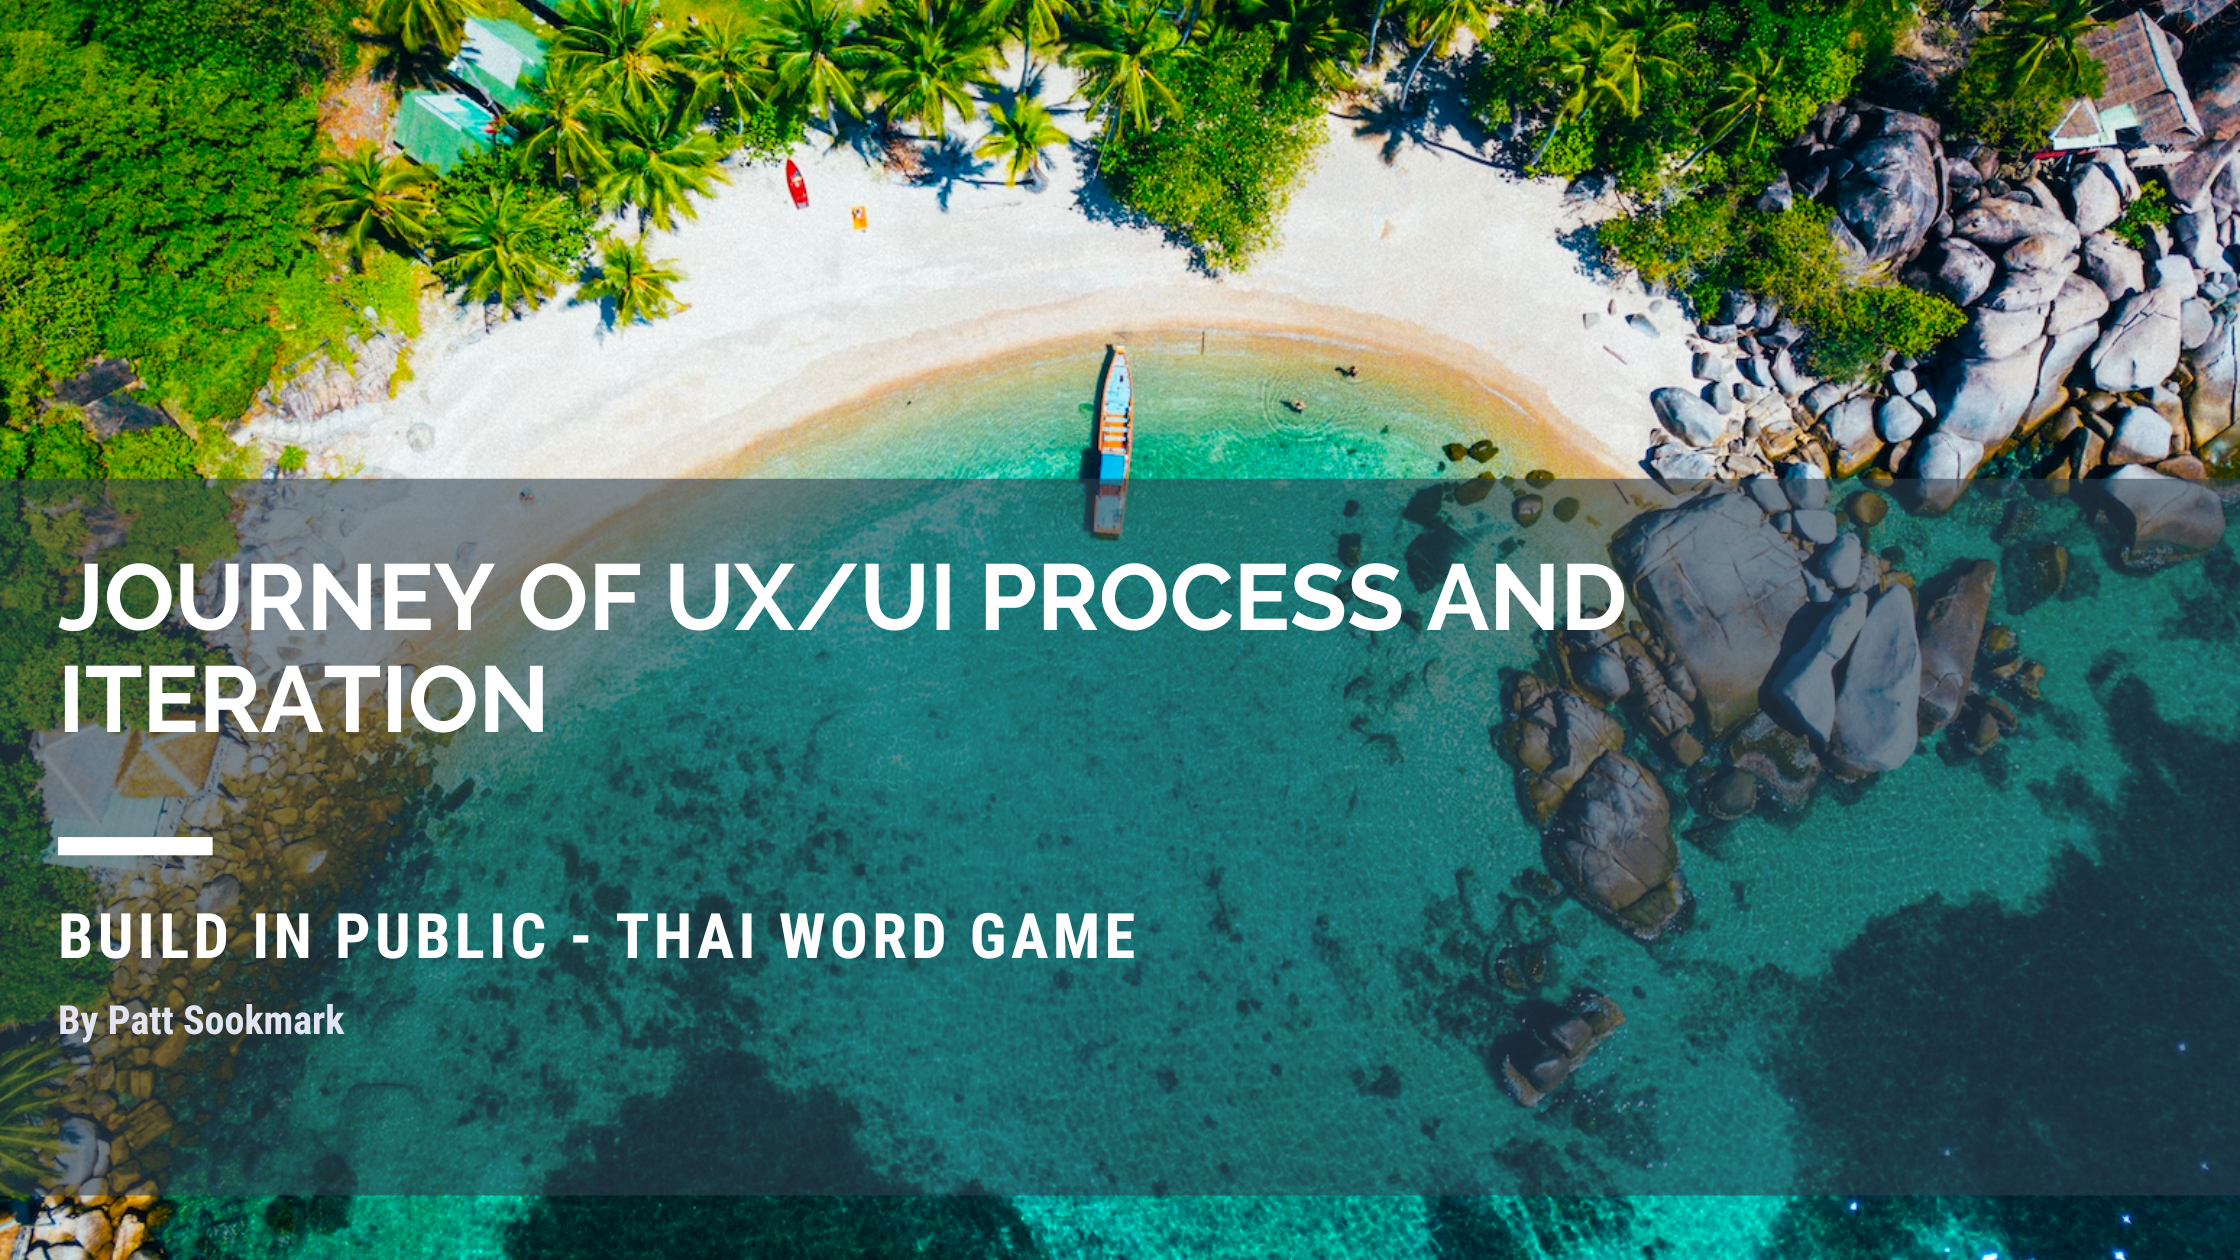 Journey into UX/UI process of Building a Thai Word Game